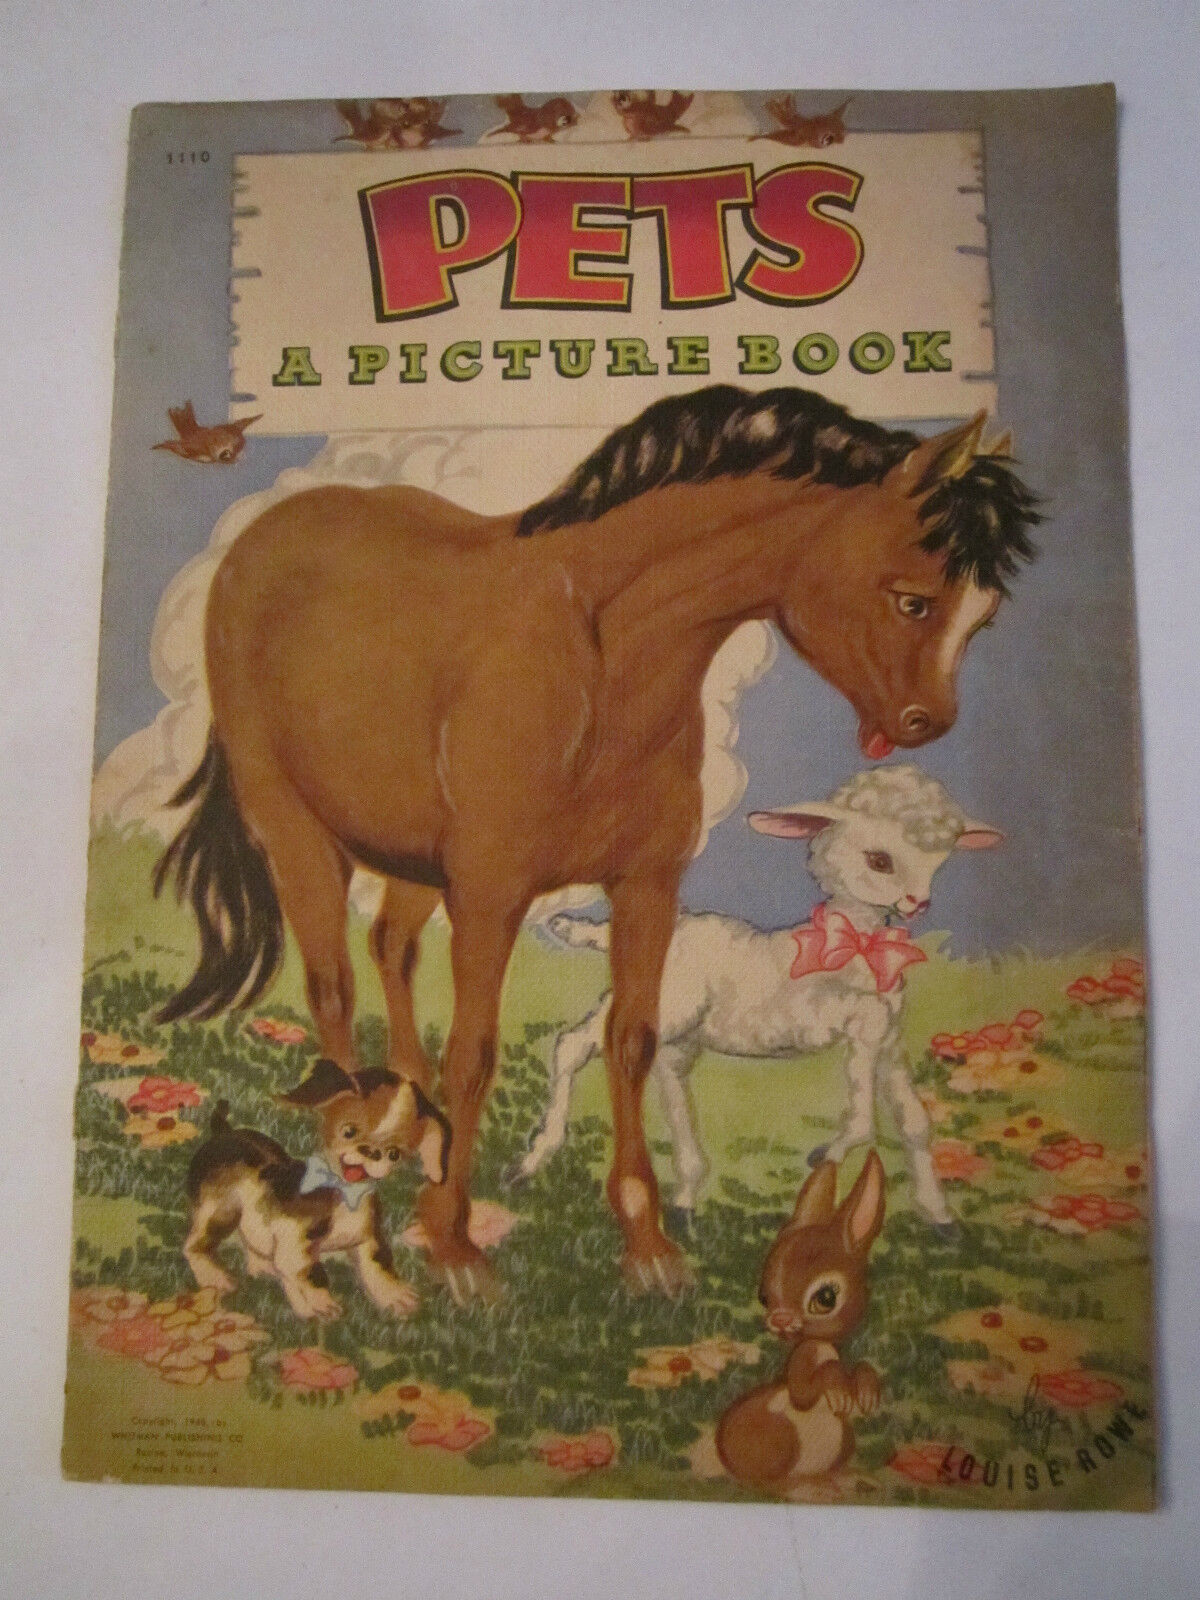 1948 PETES A PICTURE BOOK - BY LOUISE ROWE - NICE - OFC-1